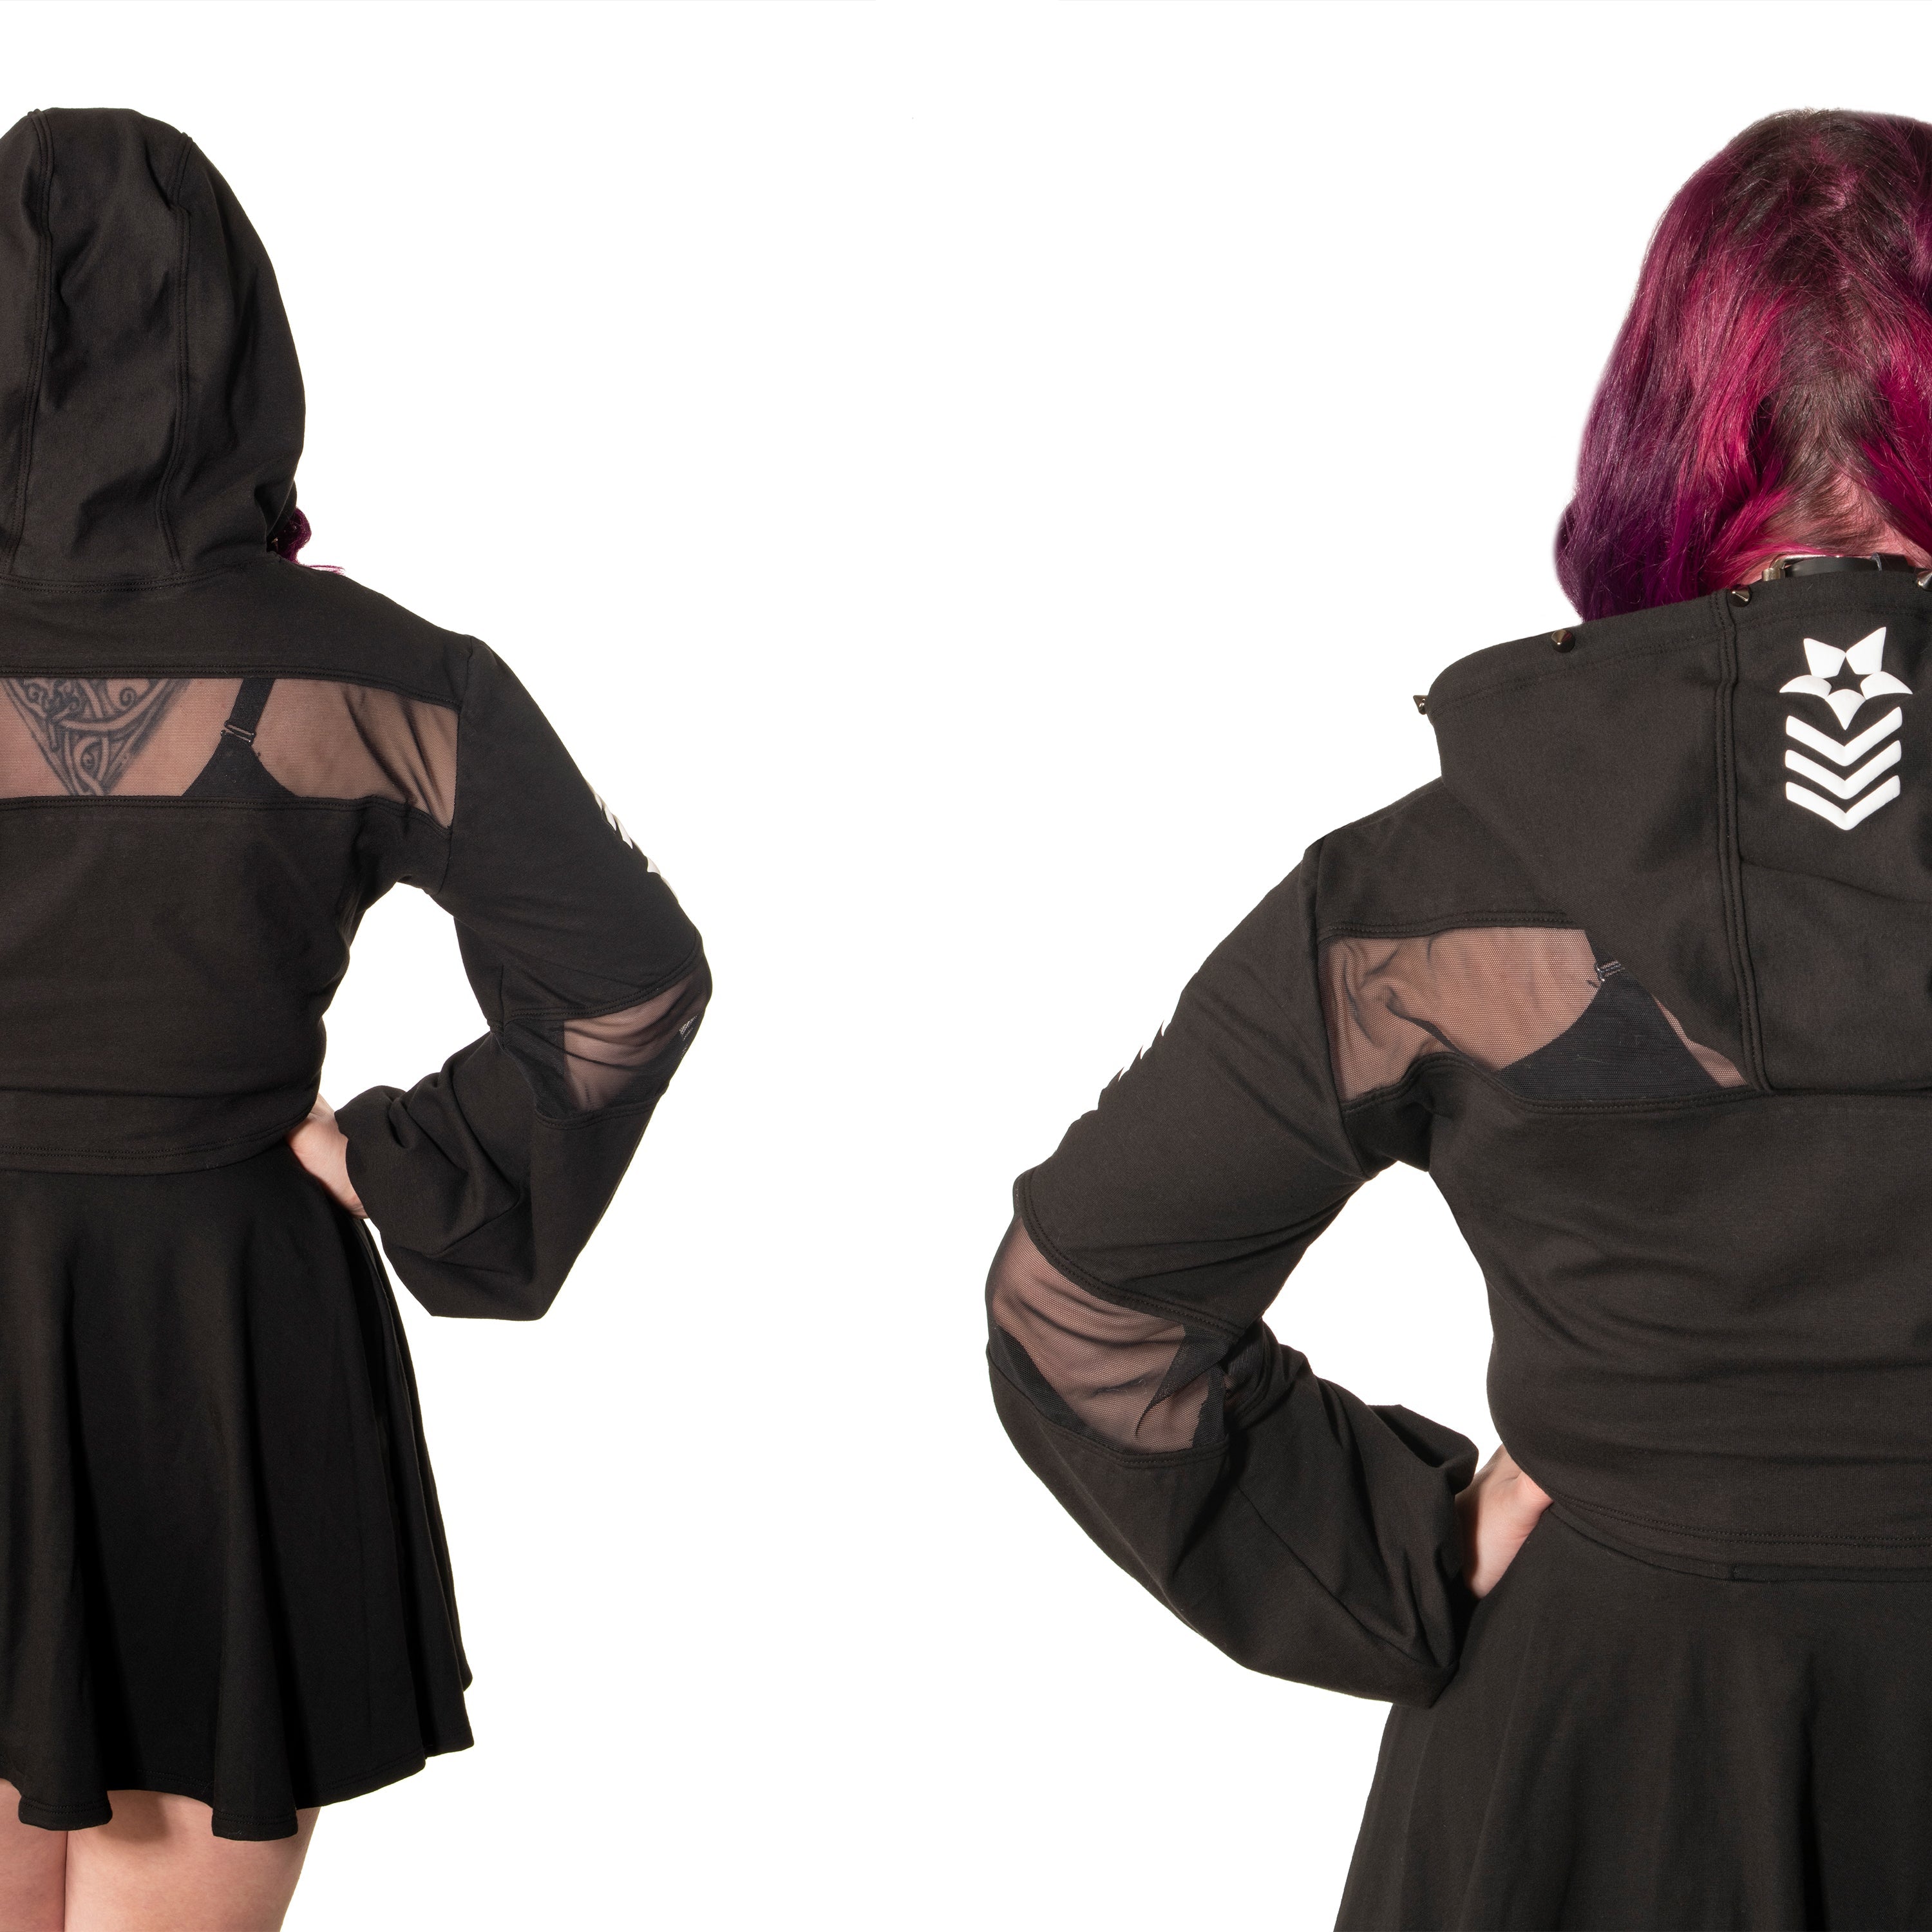 S.I. Spiked Crop Hoodie - Pawstar dsfusion Shrug goth, outerwear, sale, ship-15, ship-30day, tops